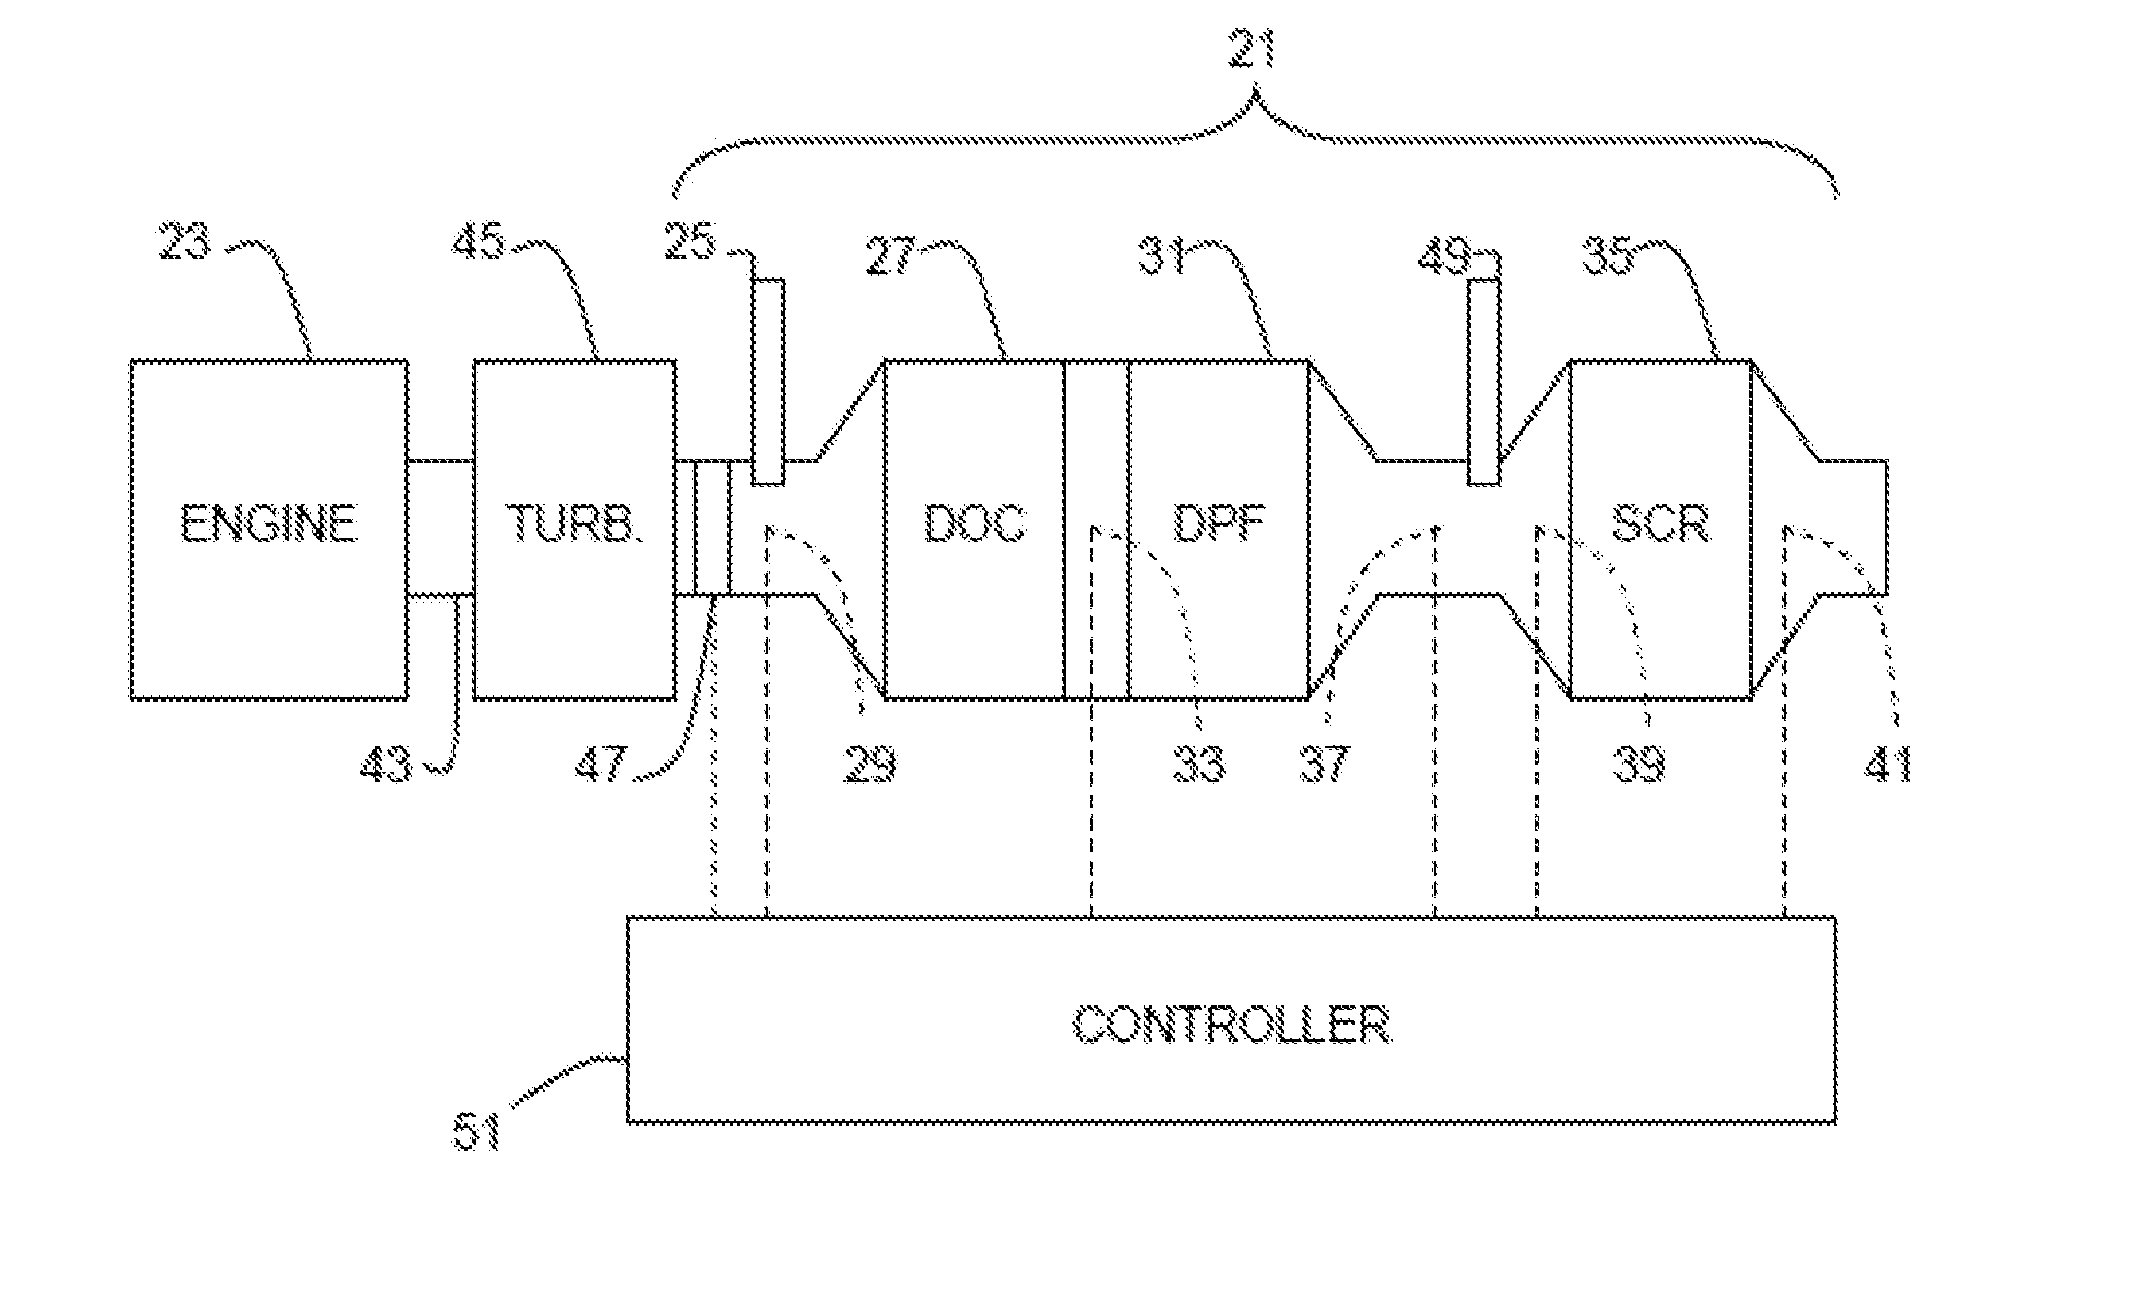 Method for monitoring components in an exhaust after treatment system, an exhaust after treatment system, and a controller for an exhaust after treatment system